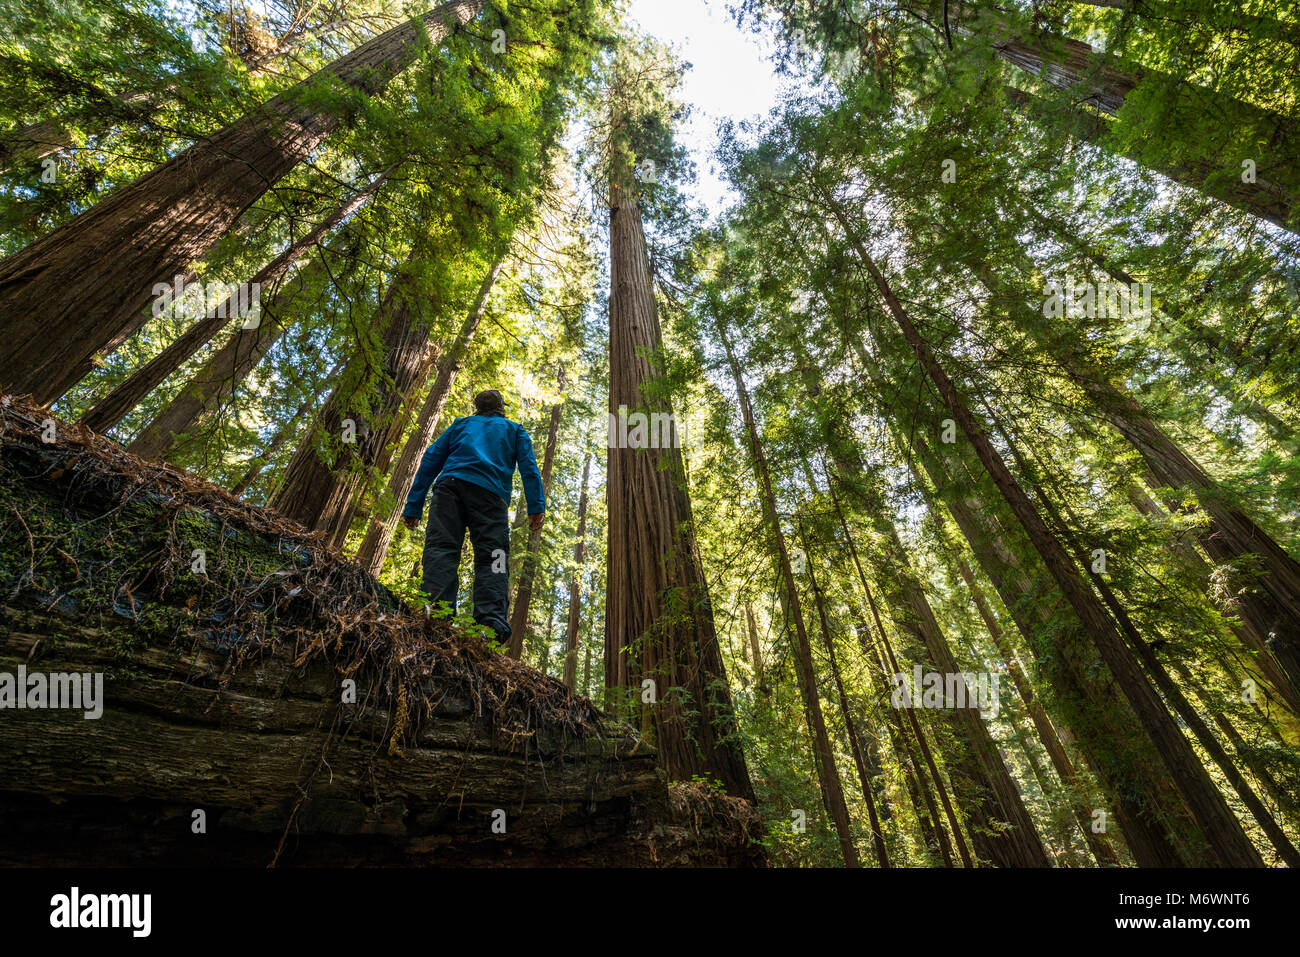 A man hikes through giant redwood trees in Humboldt Redwoods State and National Park along the Rockefeller Loop in Avenue of the Giants, California. Stock Photo